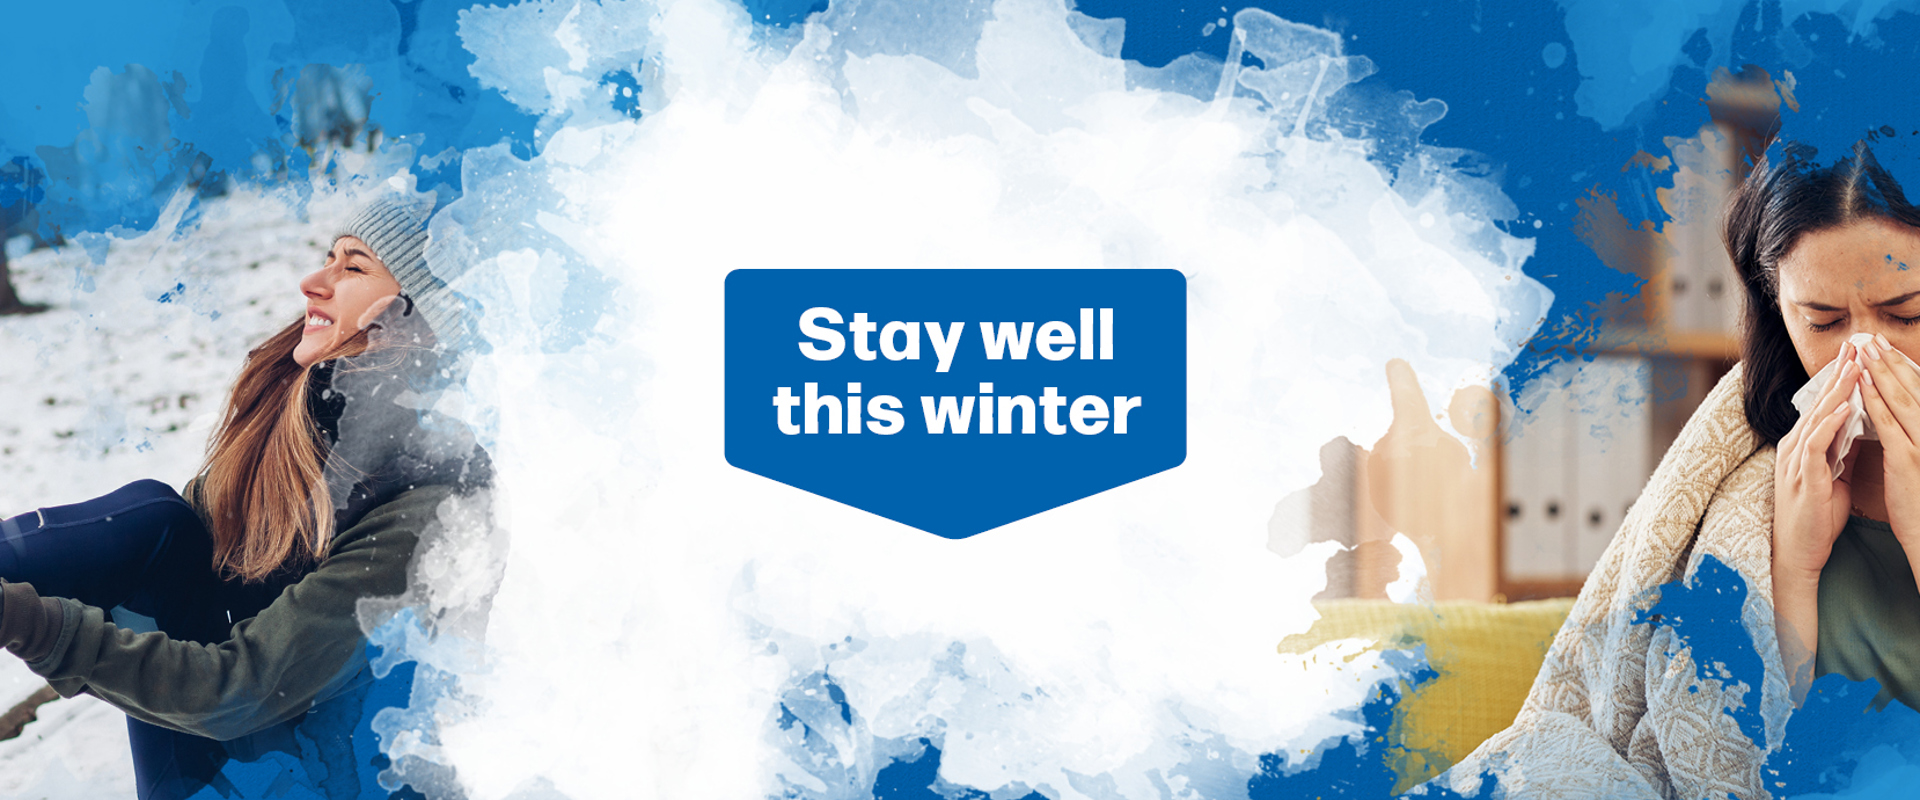 Stay Well This Winter Carousel Banner